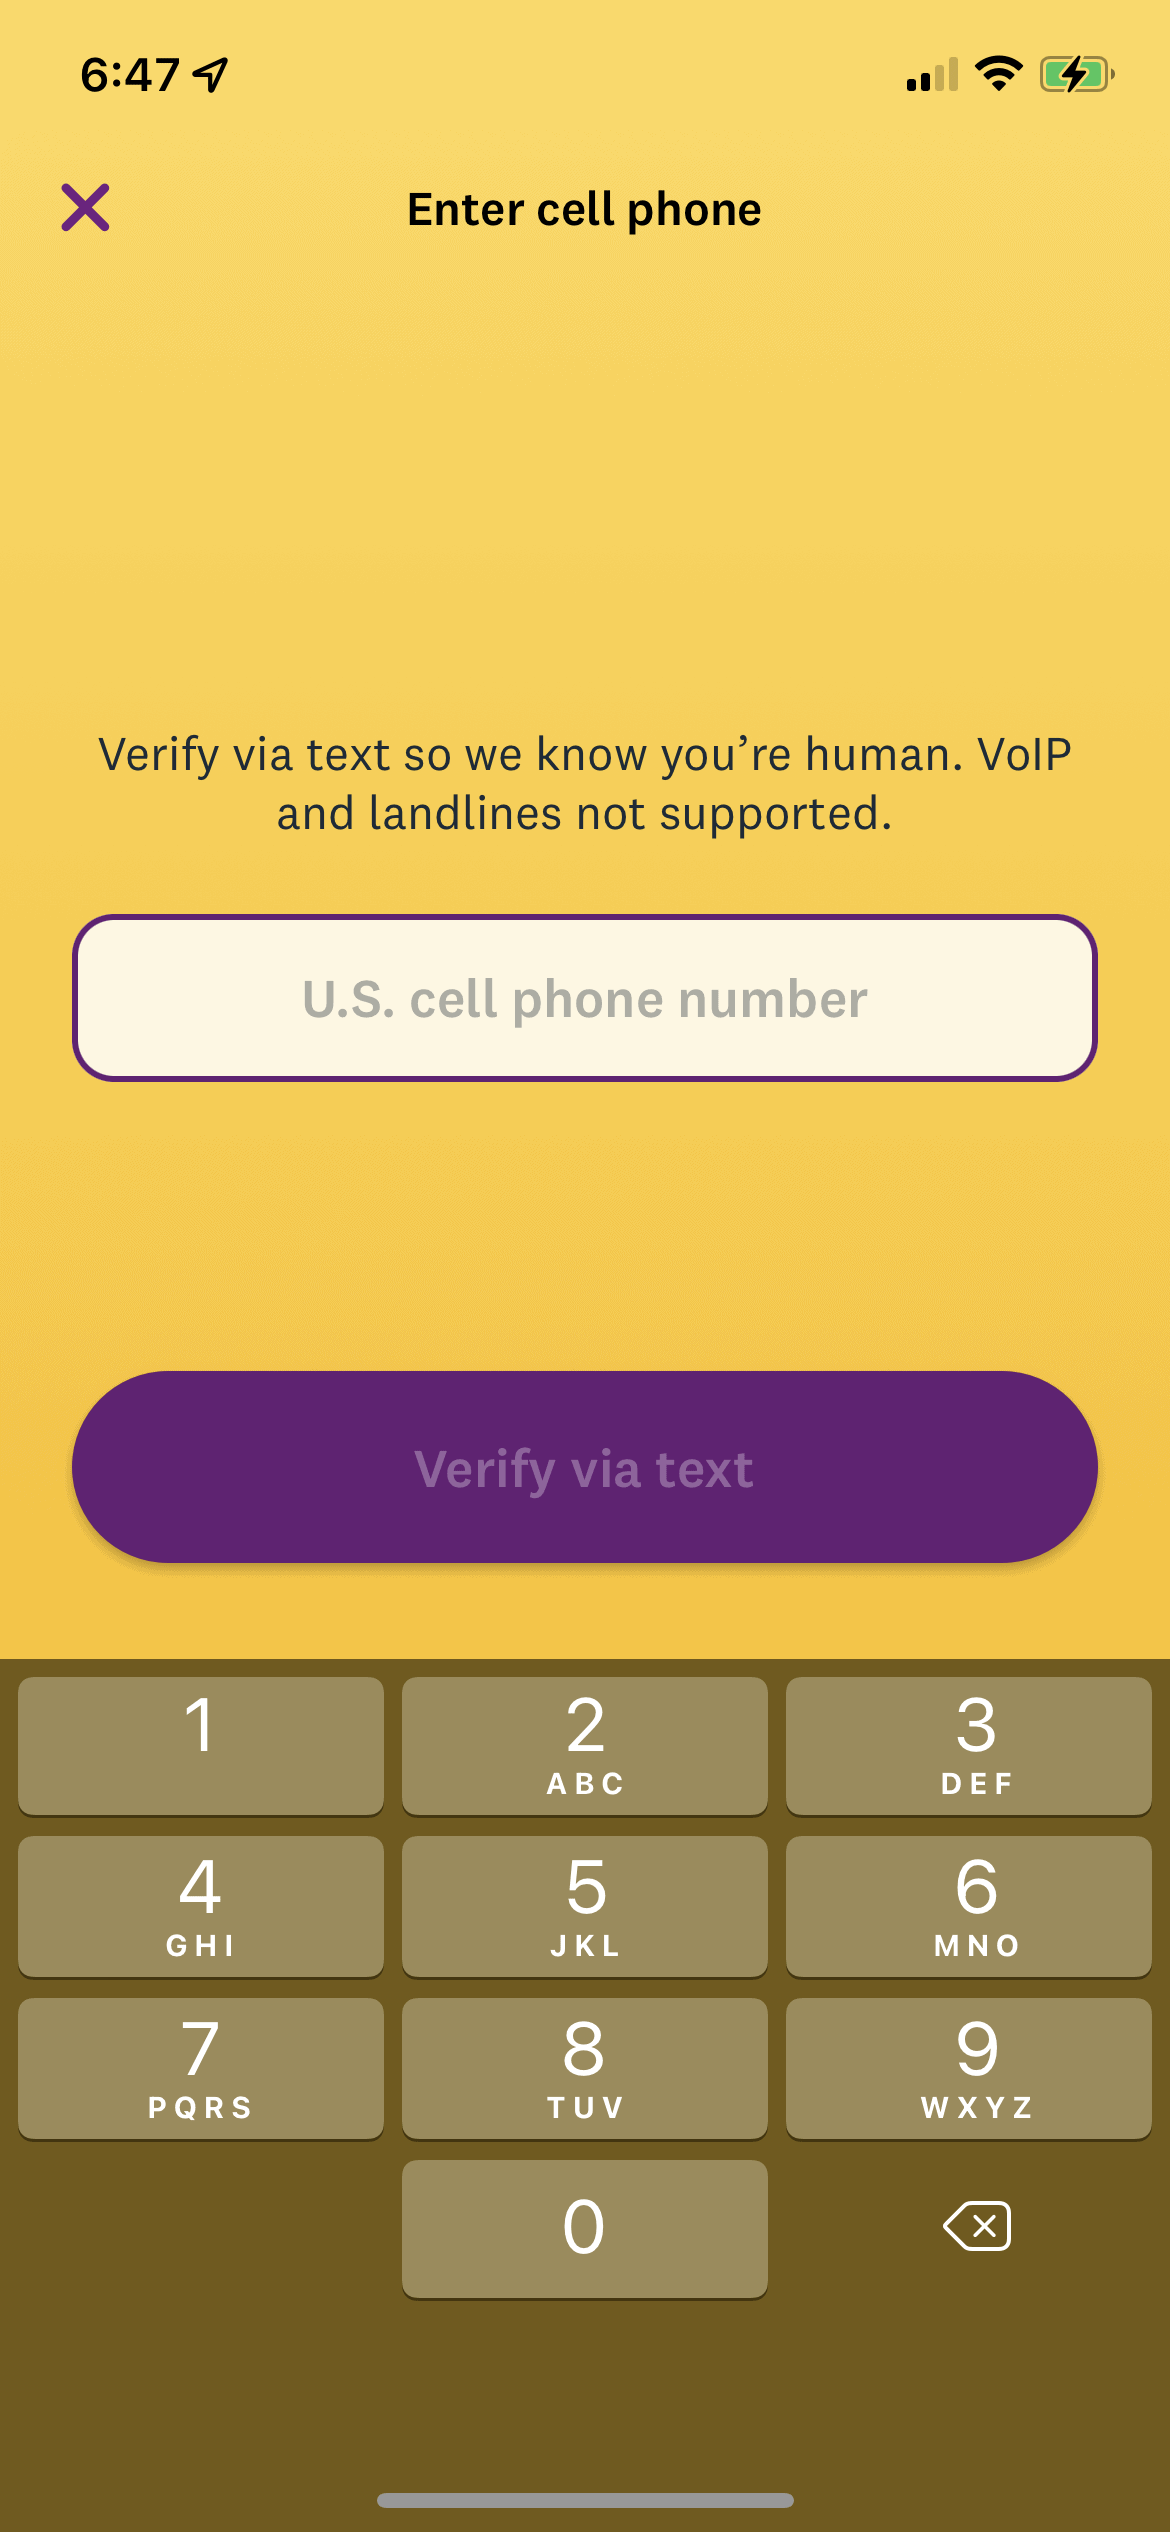 You're required to enter your phone number to cash-out.